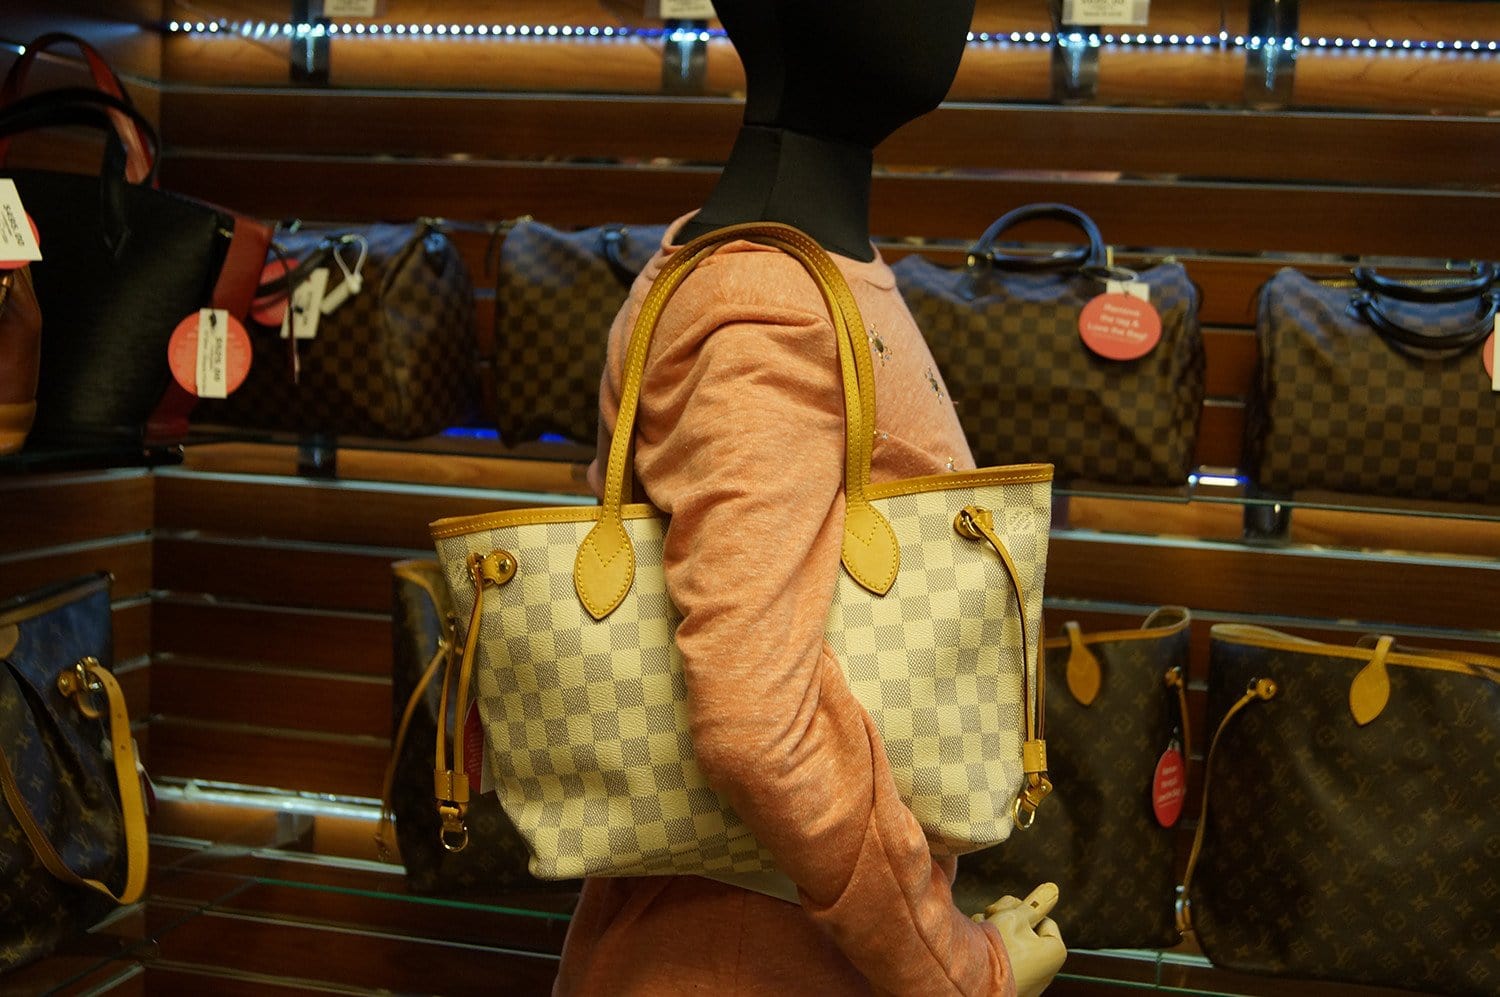 Louis Vuitton Neverfull Pm with Pouch